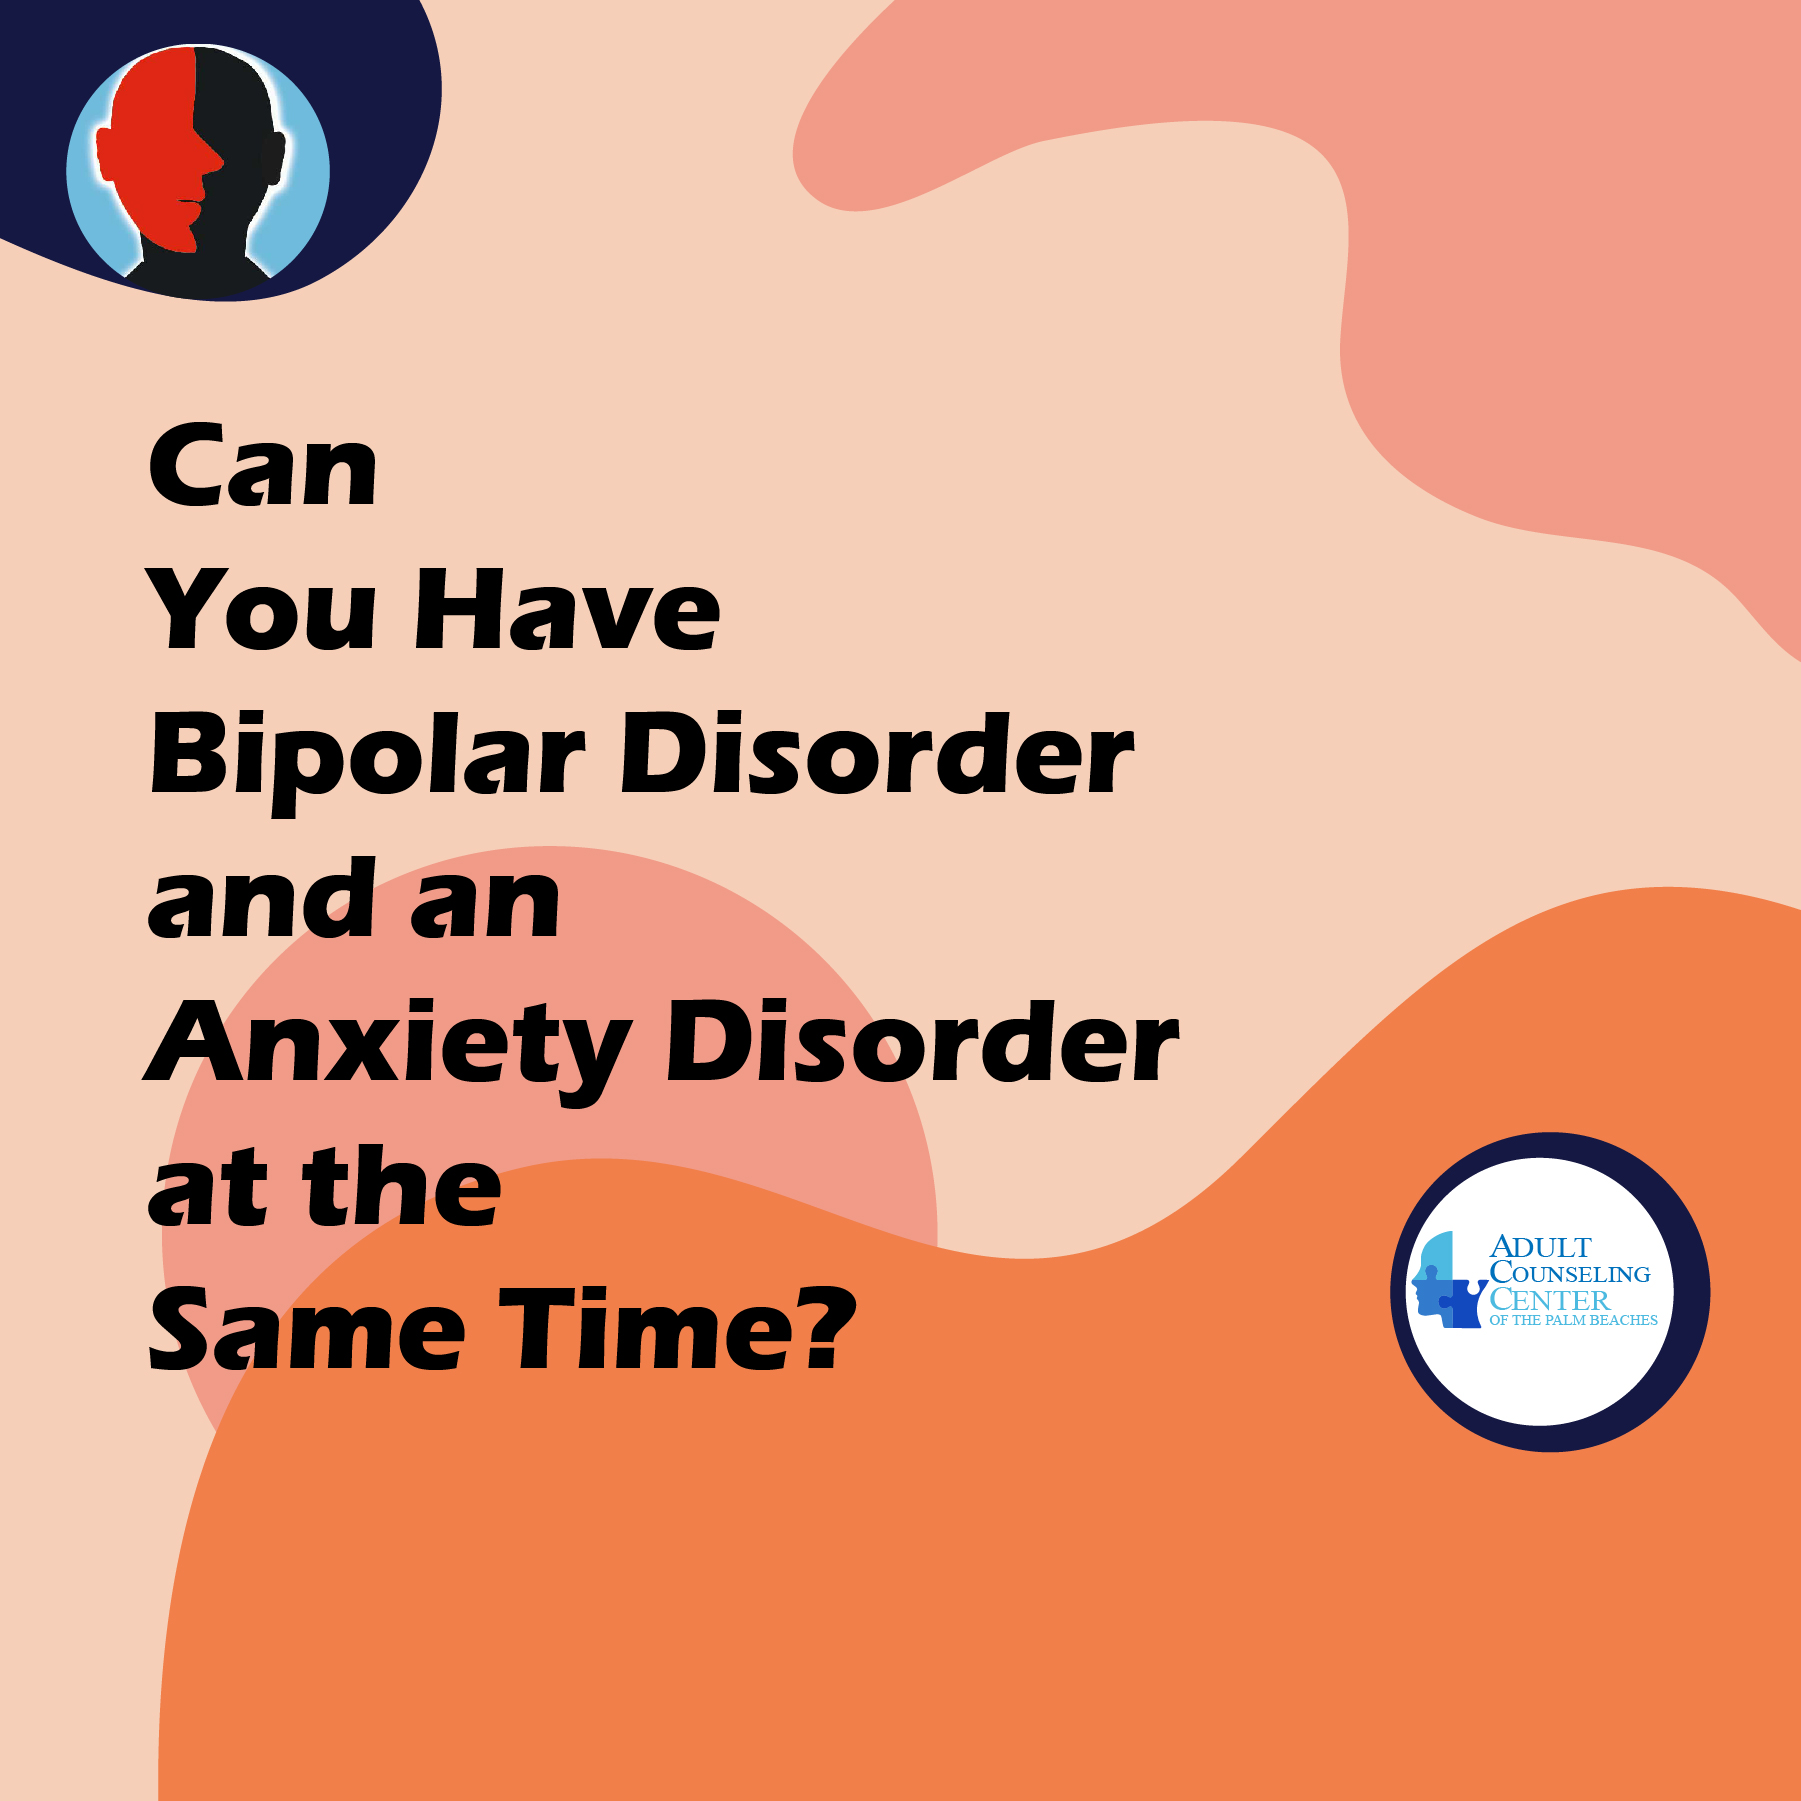 Can You Have Bipolar Disorder and an Anxiety Disorder at the Same Time?